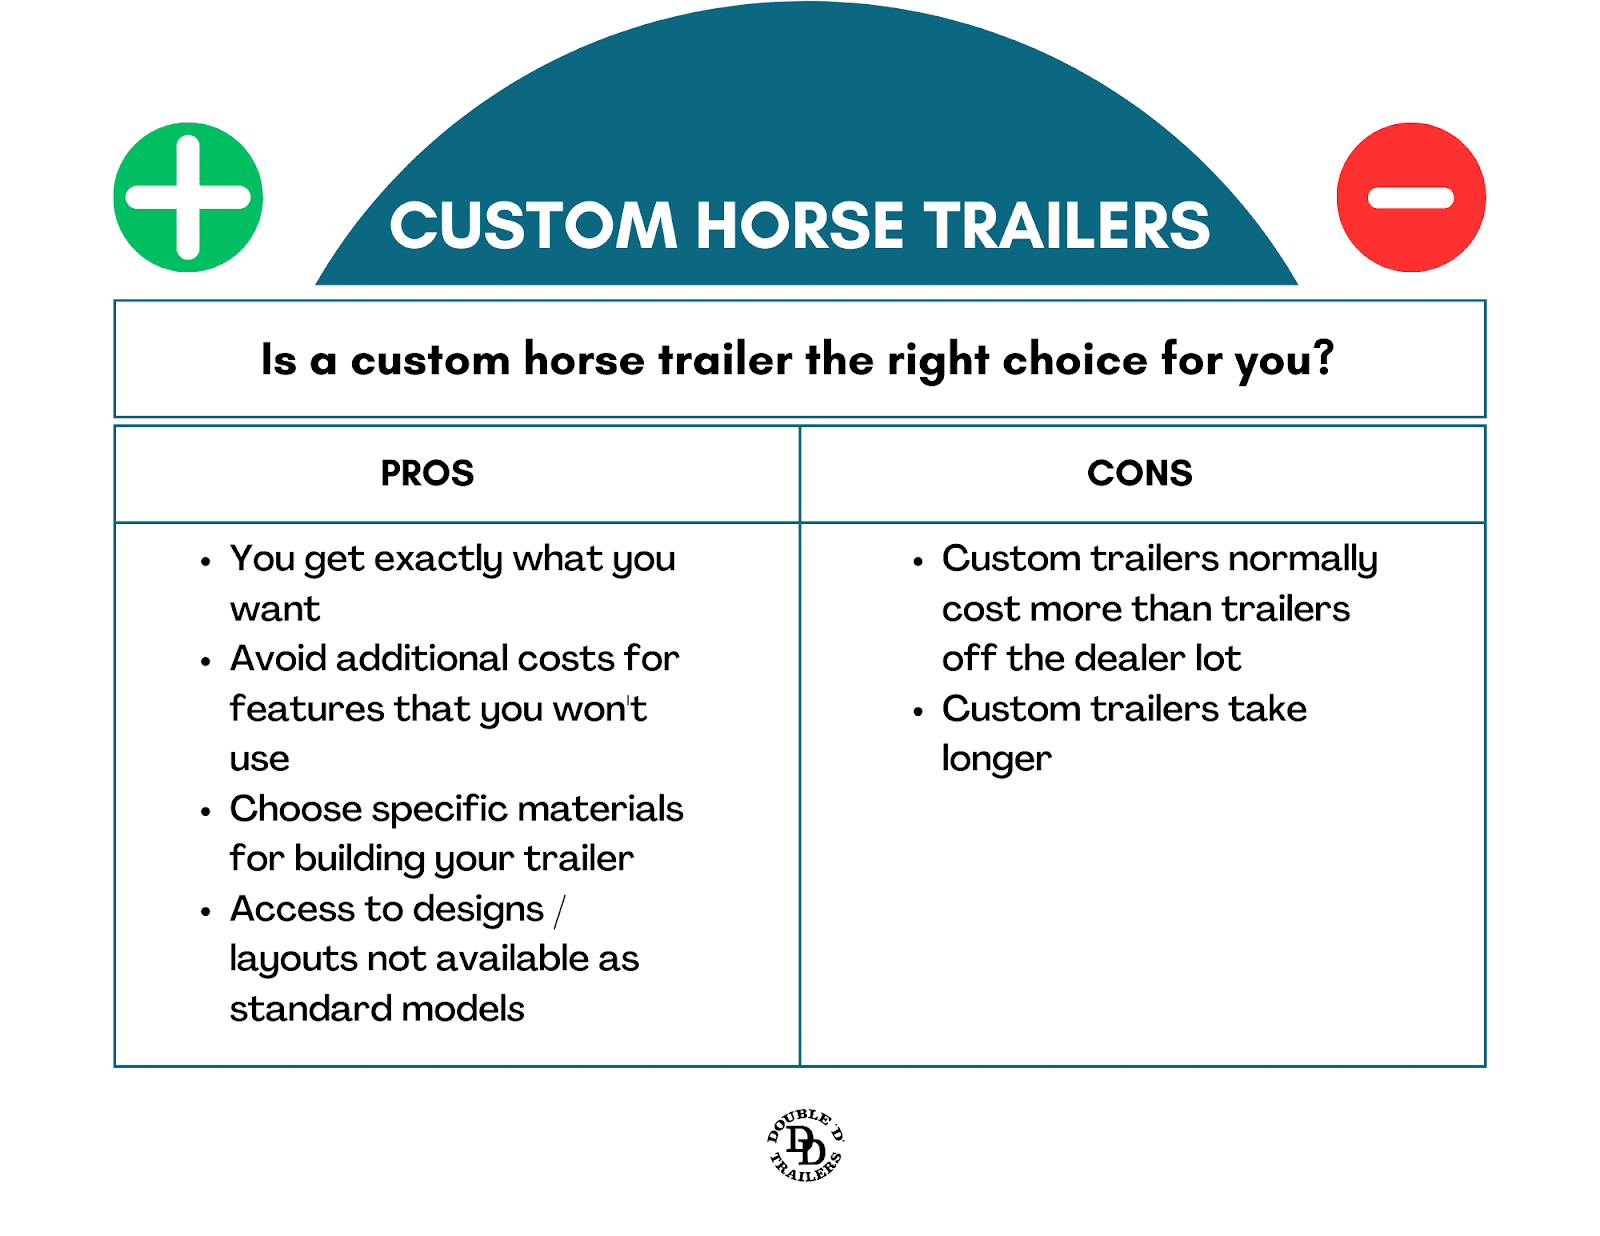 Custom horse trailer pros and cons